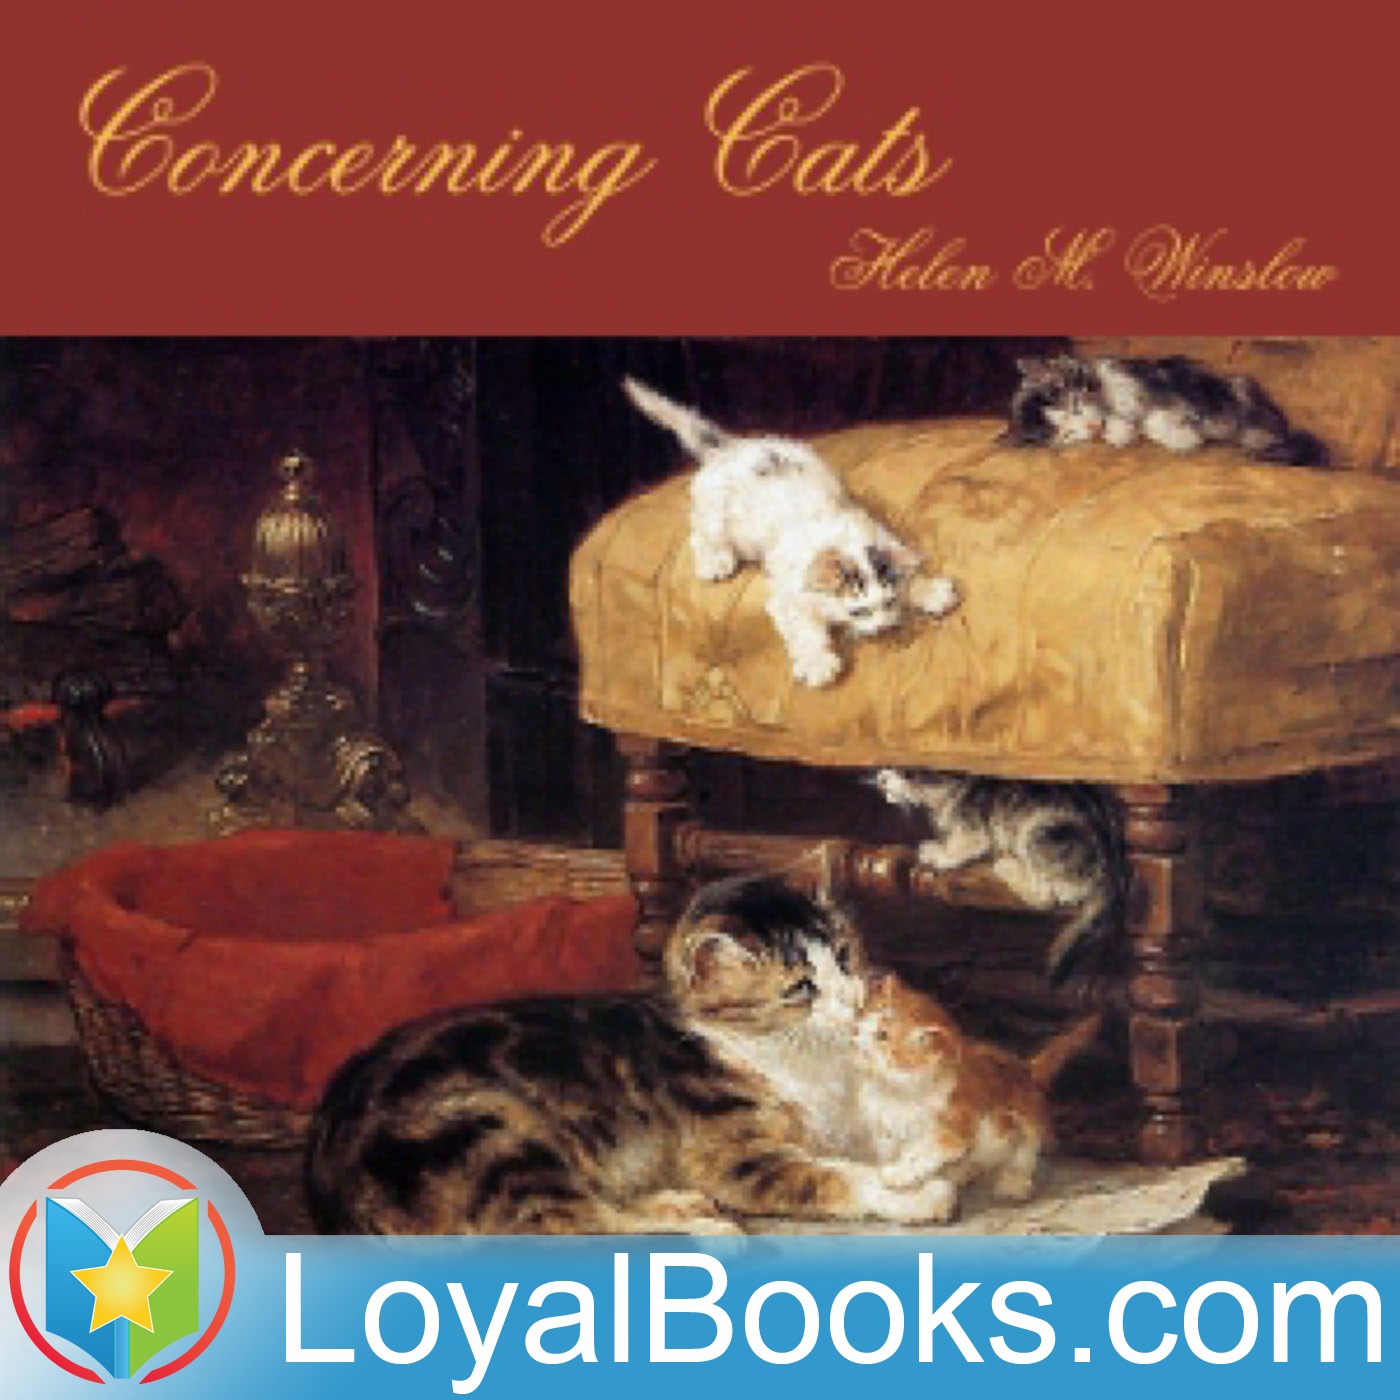 Concerning Cats by Helen M. Winslow